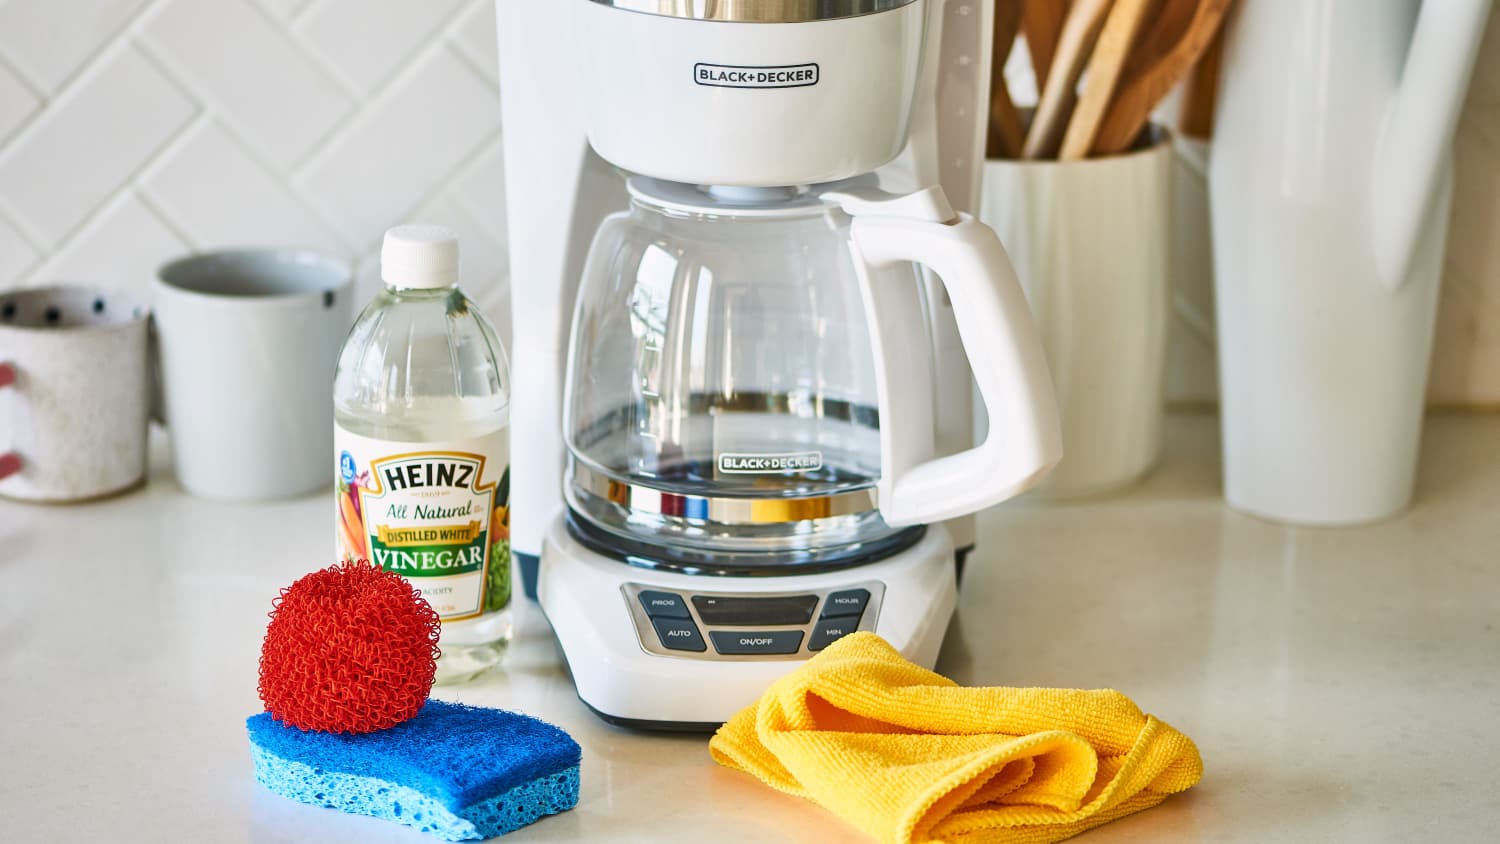 How to clean a coffee maker: and why you shouldn't use vinegar